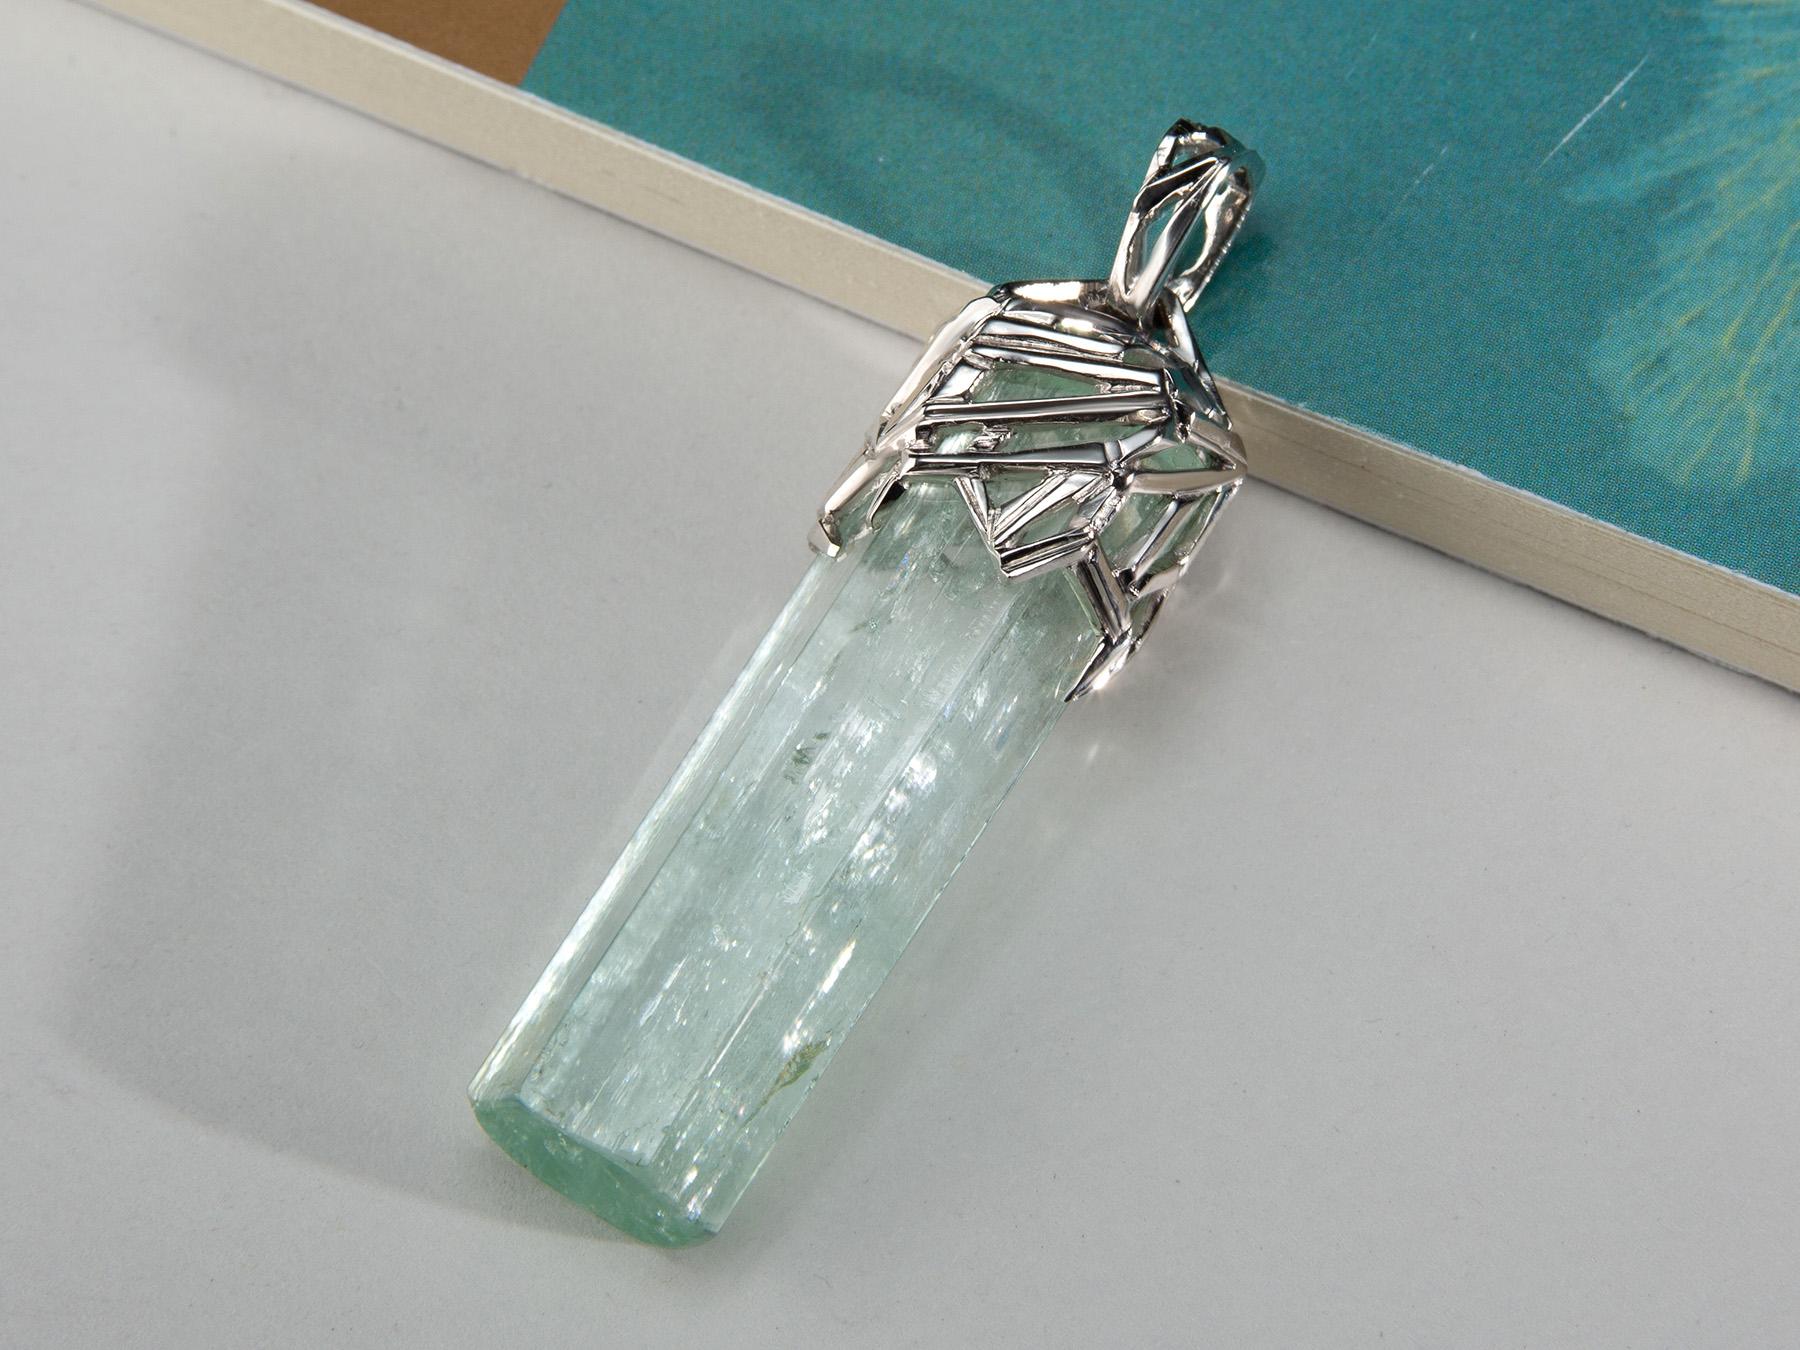 18K white gold pendant with natural Aquamarine crystal
crystal measurements - 0.55 х 1.57 in / 14 х 40 mm
crystal weight - 40.45 carats
pendant weight - 13.66 grams
pendant length - 2.09 in / 53 mm


We ship our jewelry worldwide – for our customers